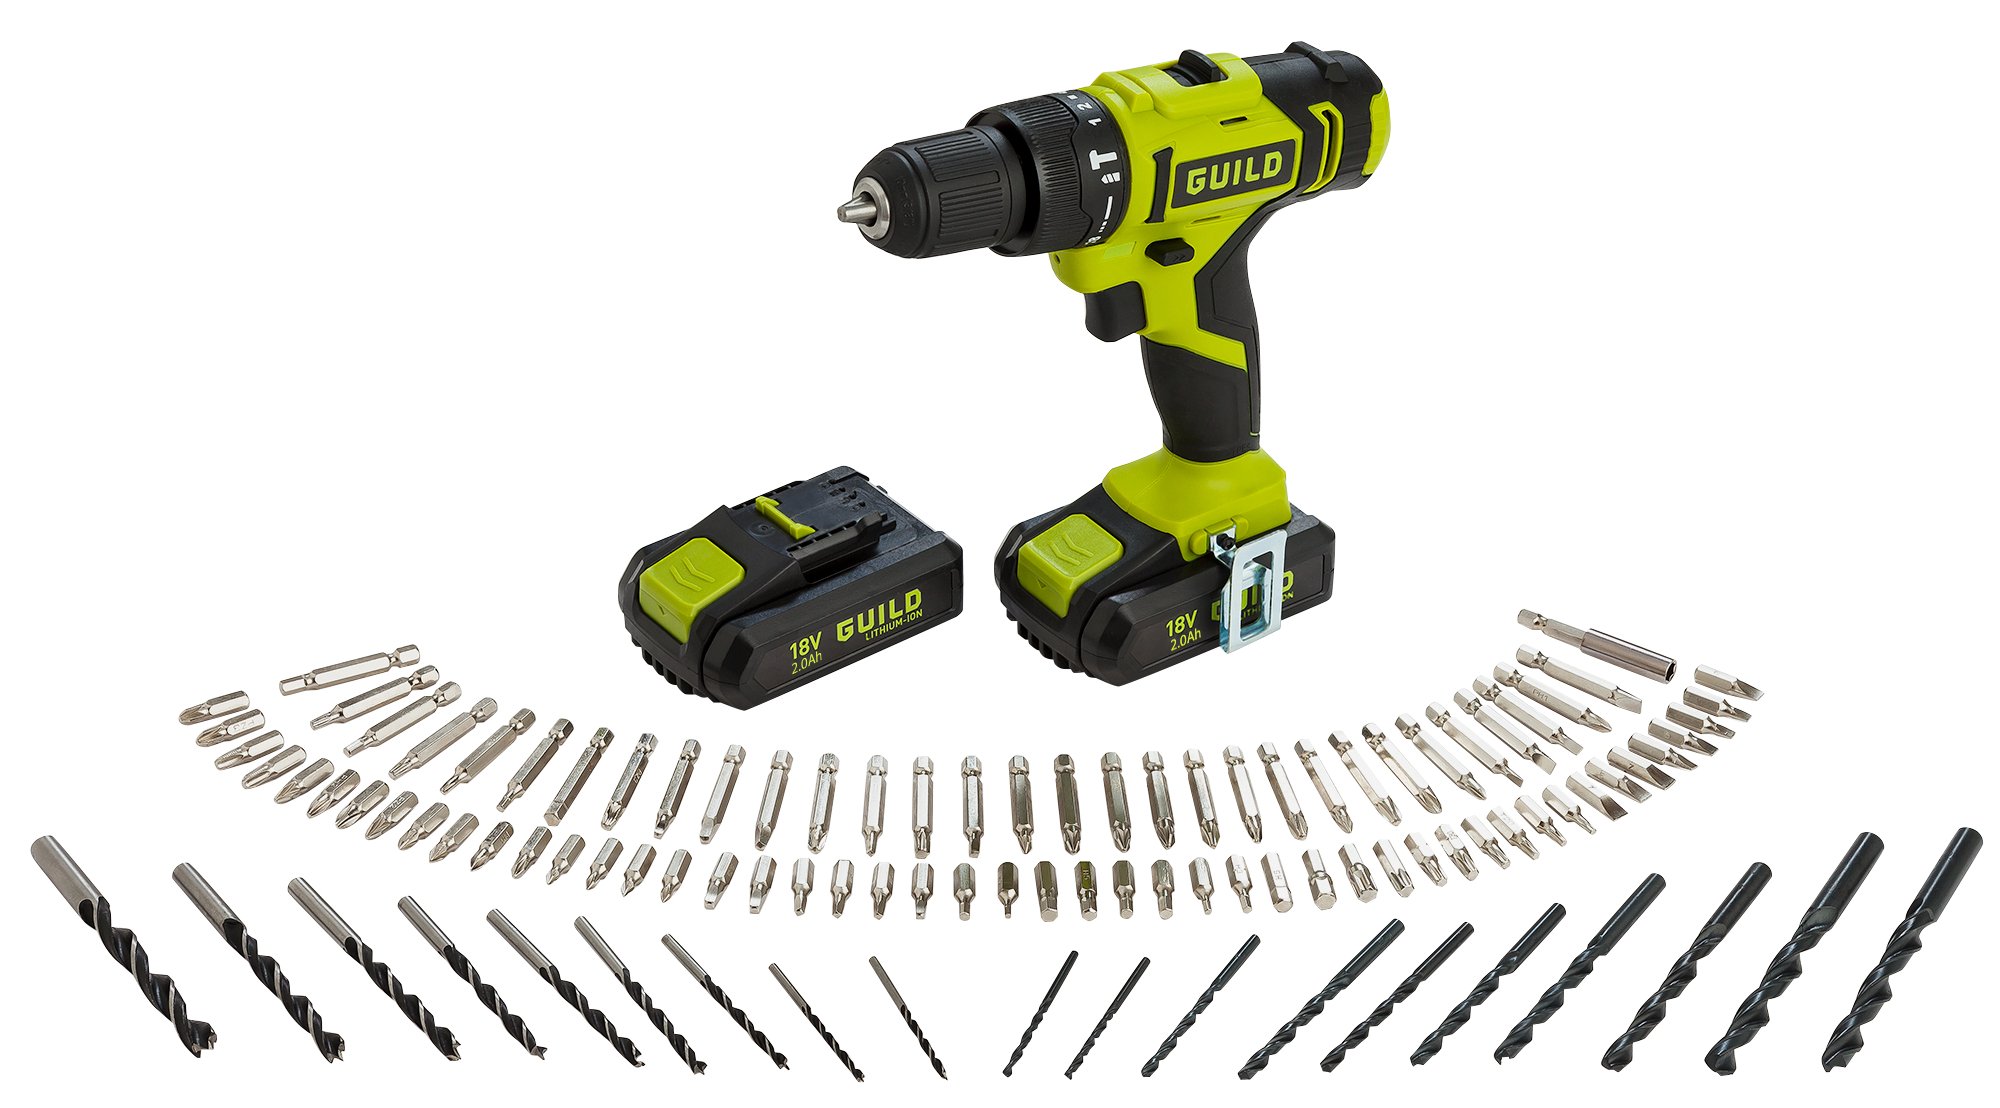 Guild 18V Cordless Impact Drill with 100 Accessories 2x2.0AH